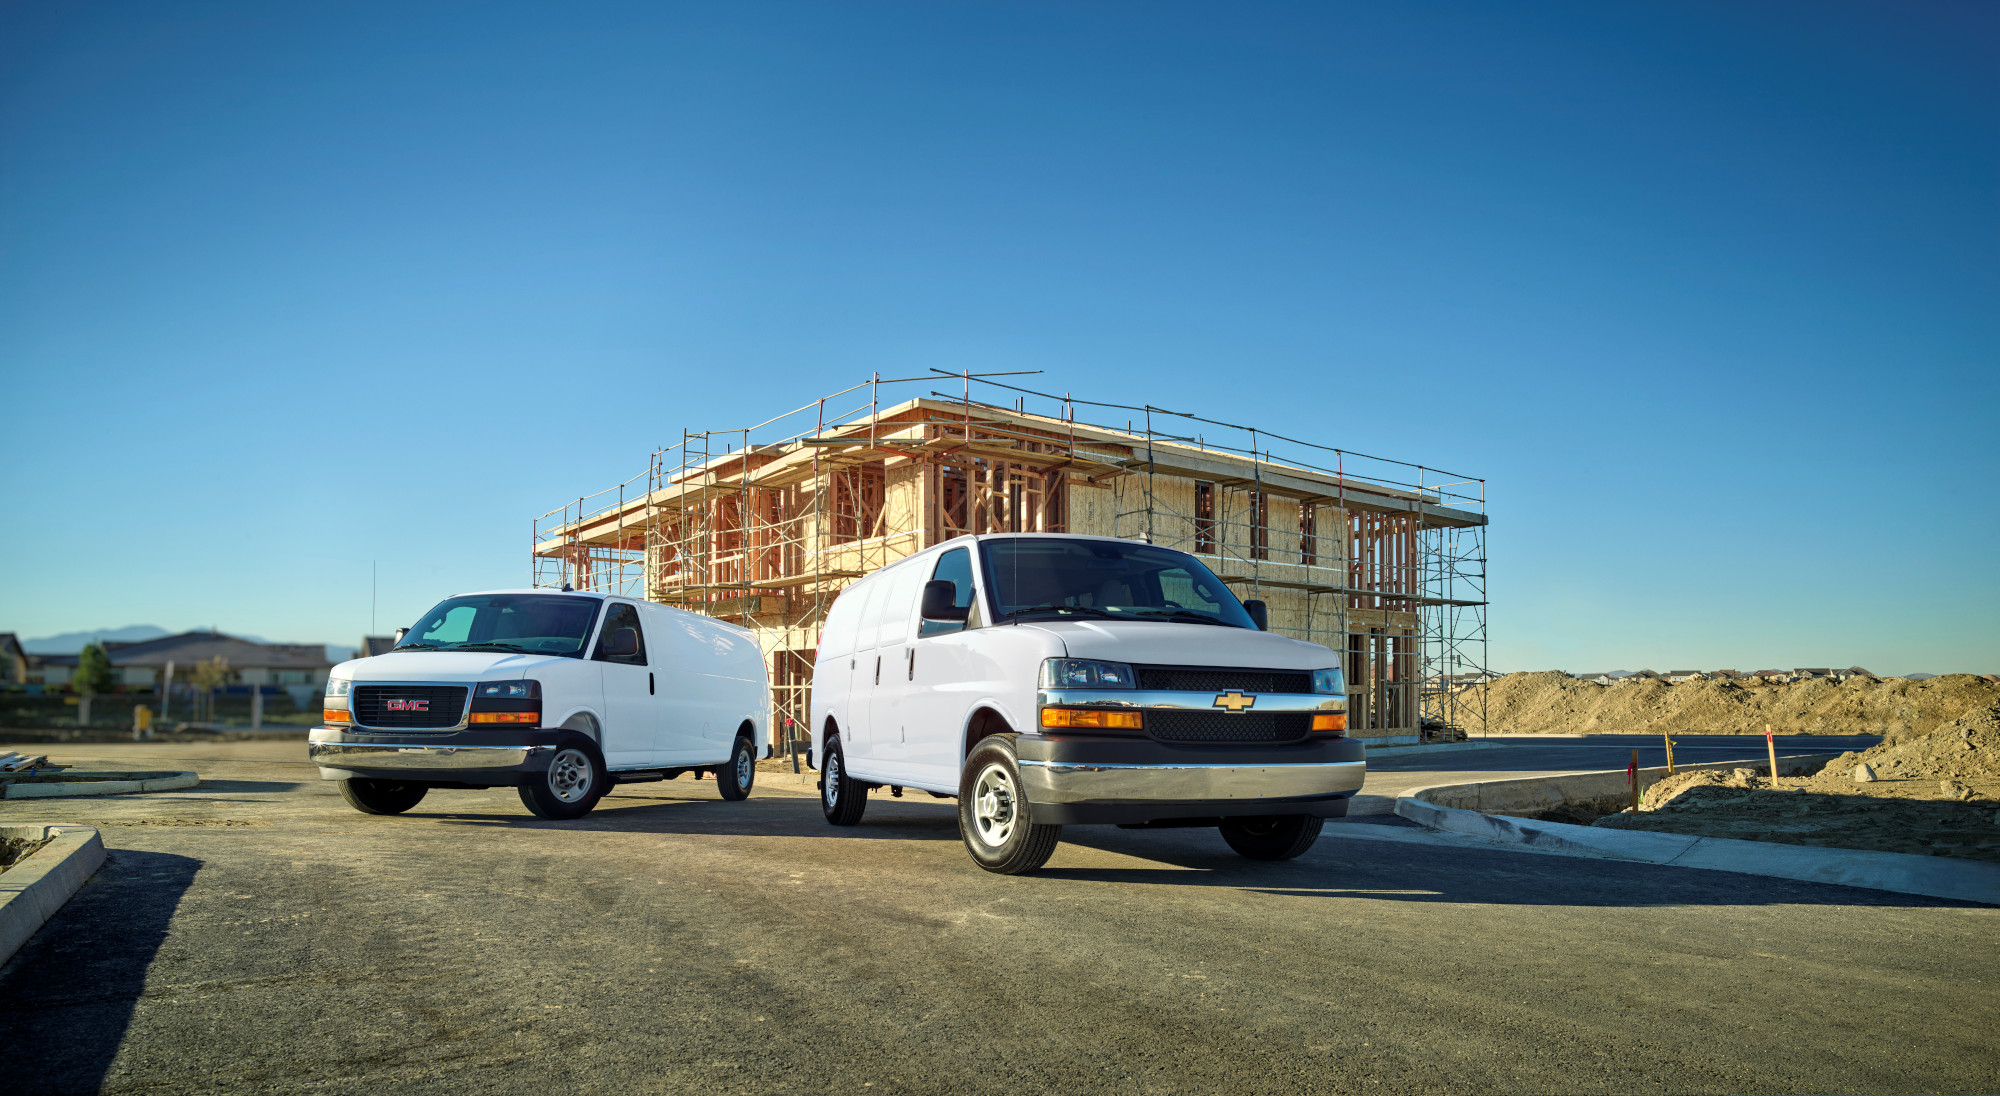 Two white cargo vans on a construction site